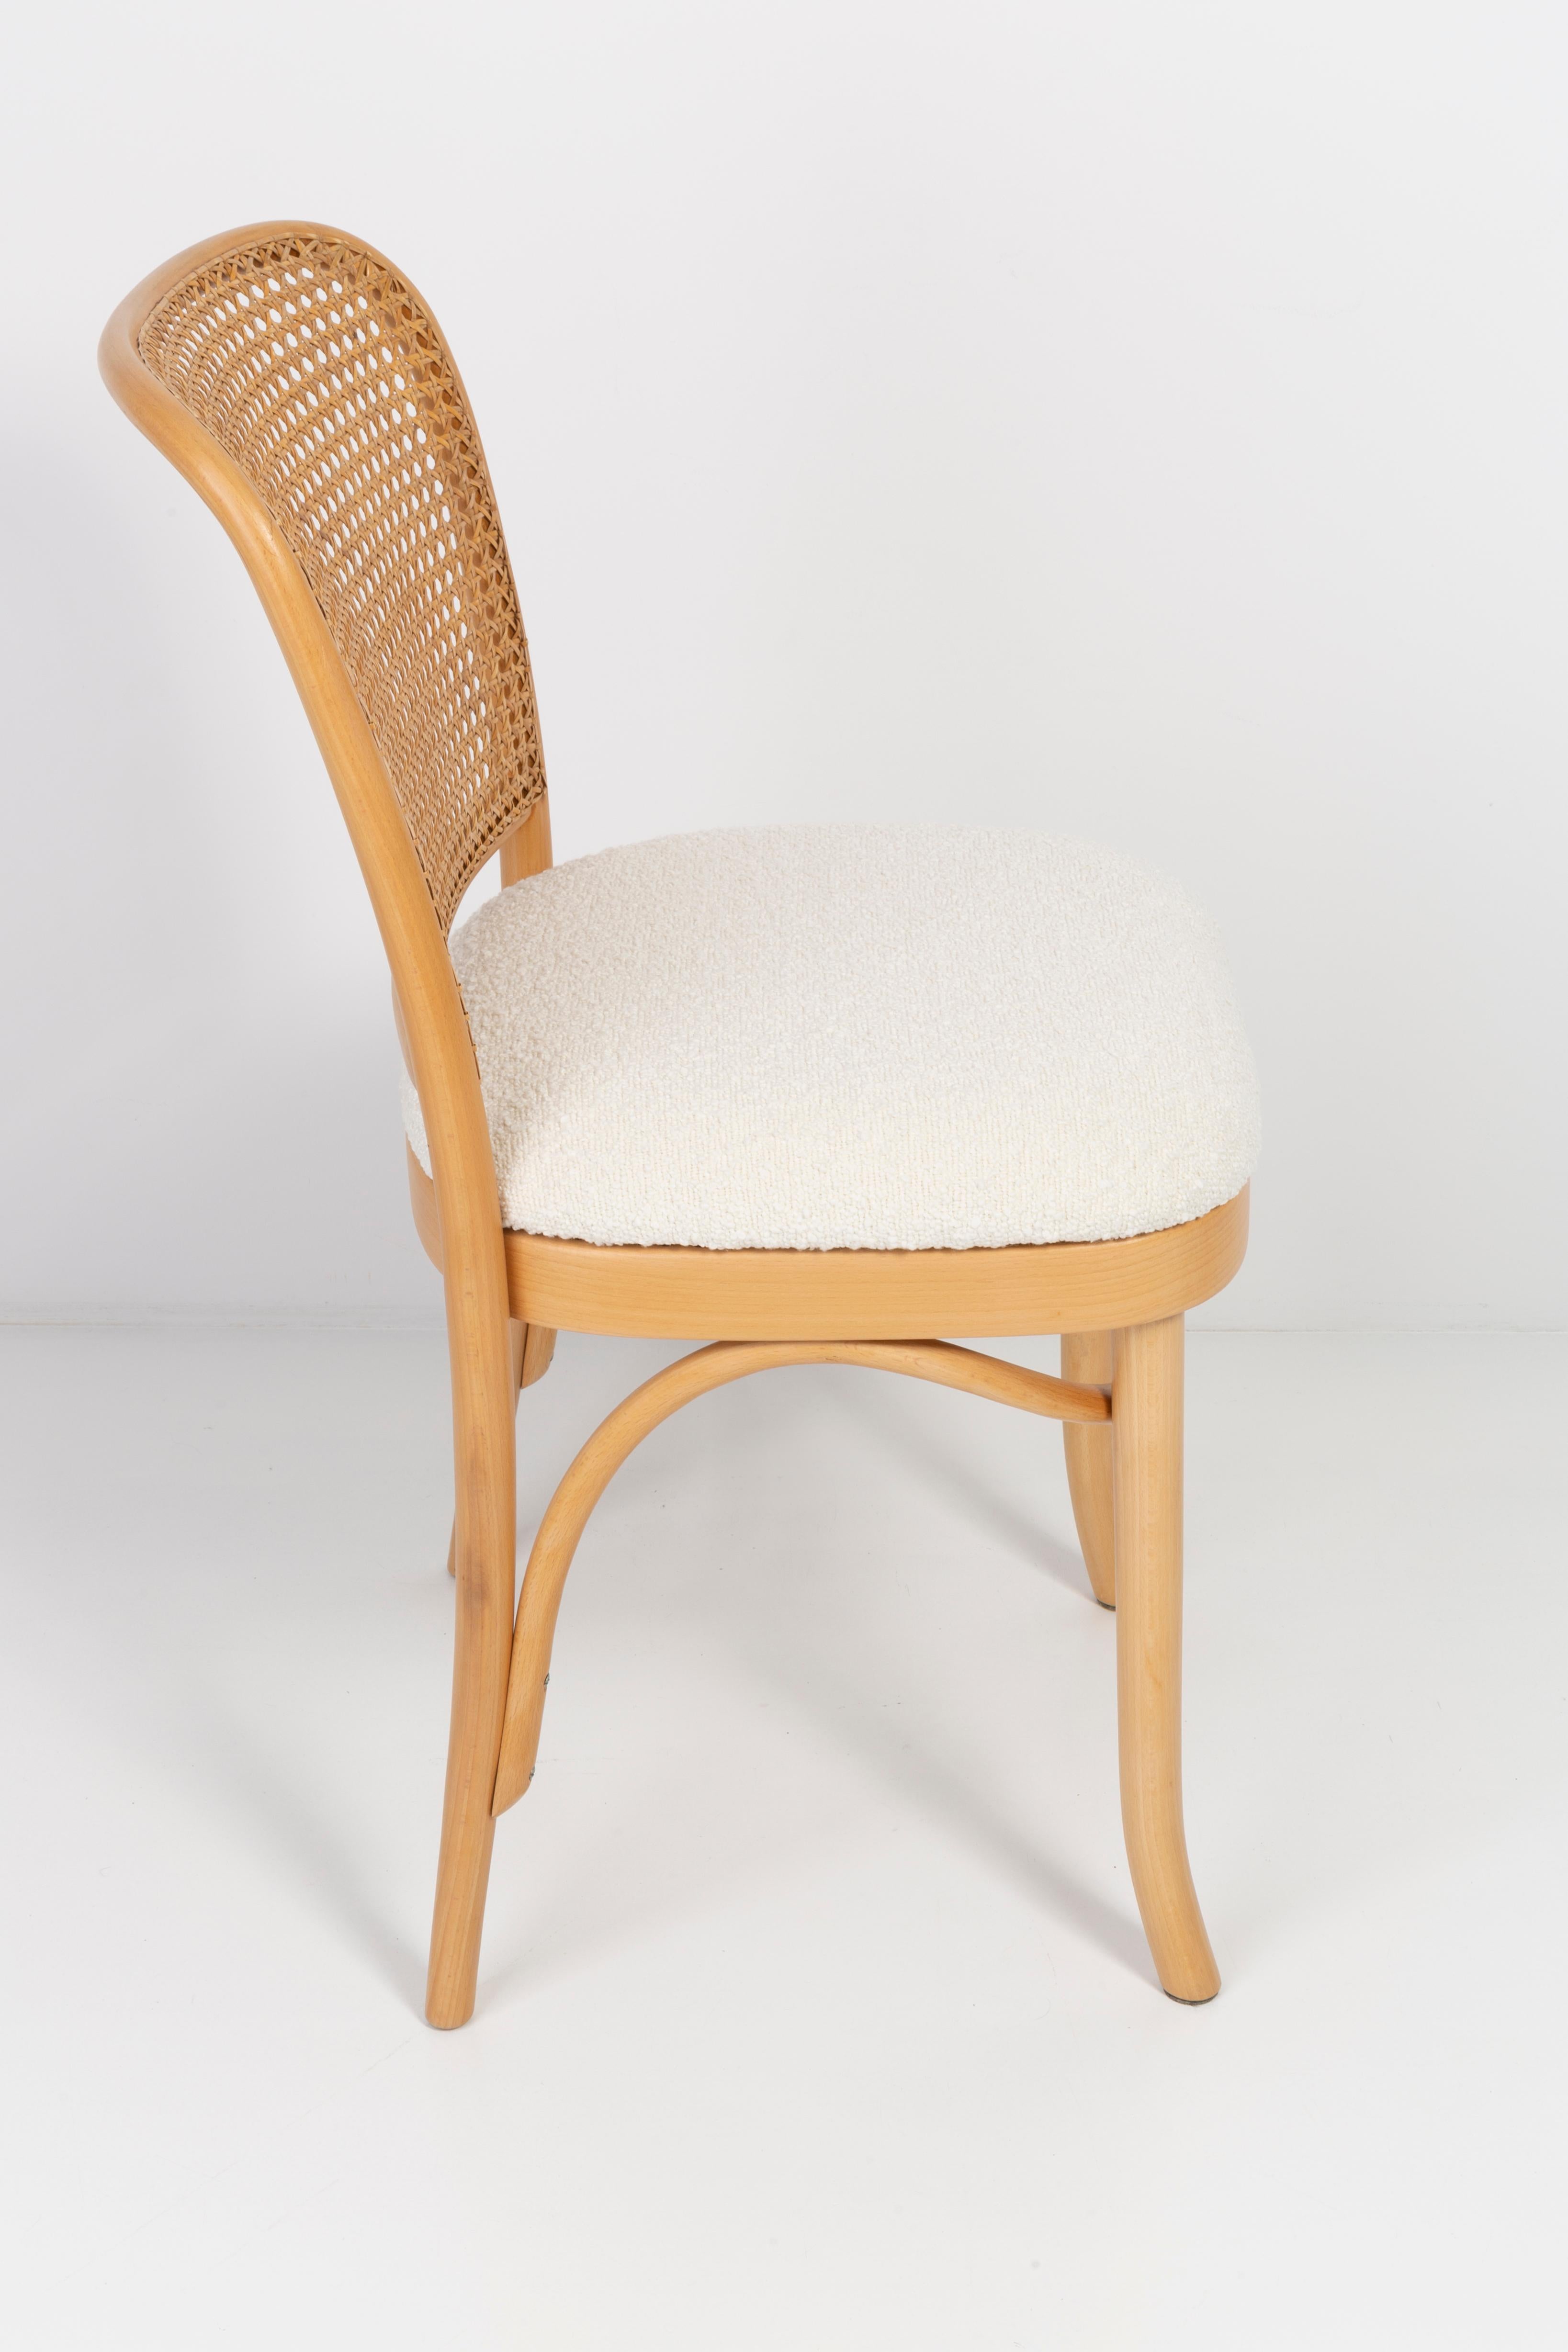 Set of Six White Boucle Thonet Wood Rattan Chairs, 1960s For Sale 4